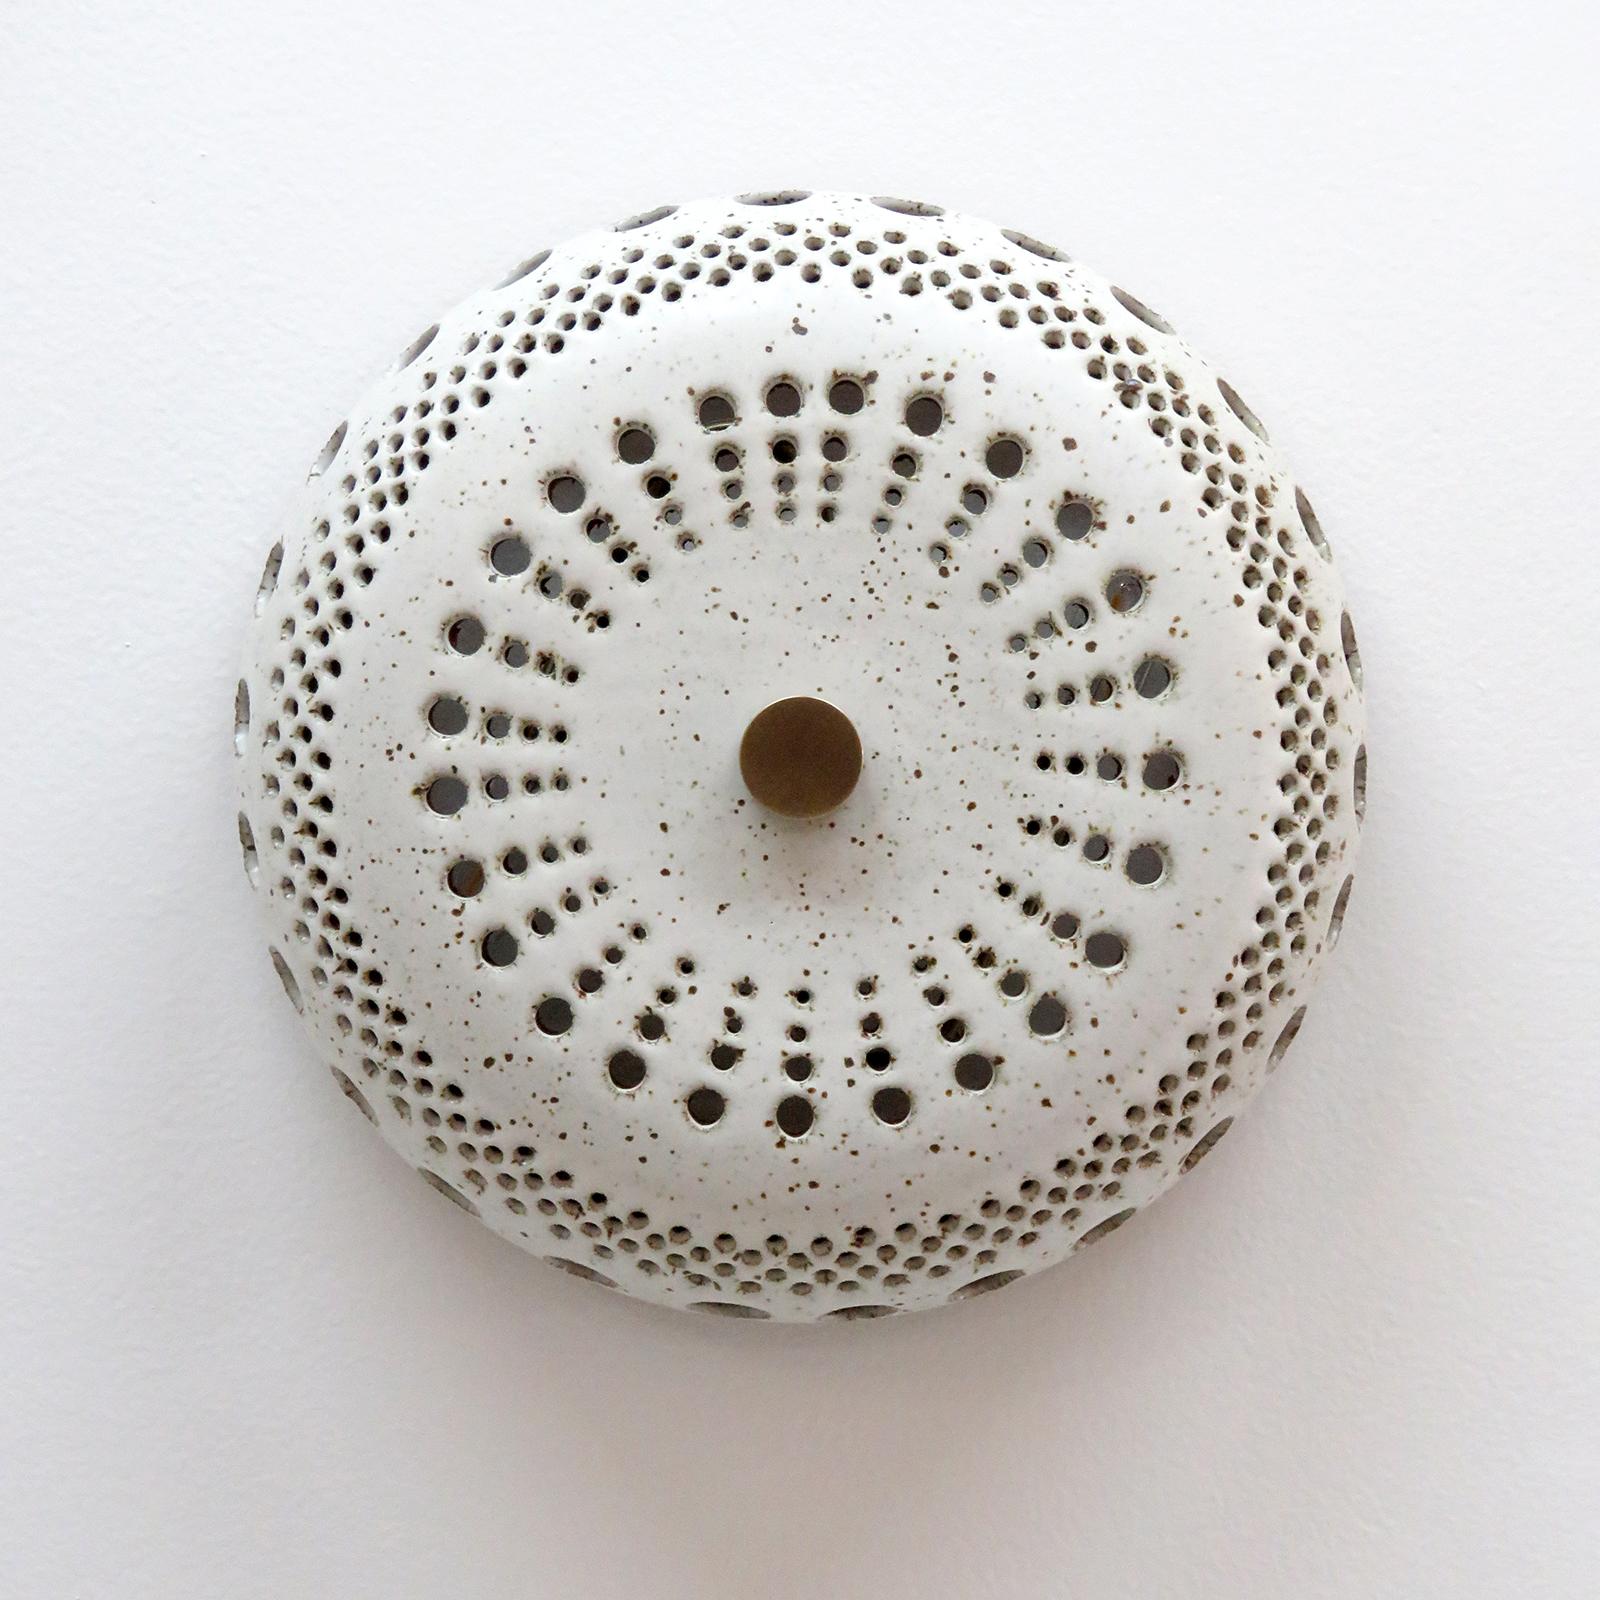 Stunning ceramic light No.12, designed and handcrafted by Los Angeles based ceramicist Heather Levine. High fired stoneware with matte white glaze on a cork colored clay body with decorative perforations to expose light in patterns on nearby